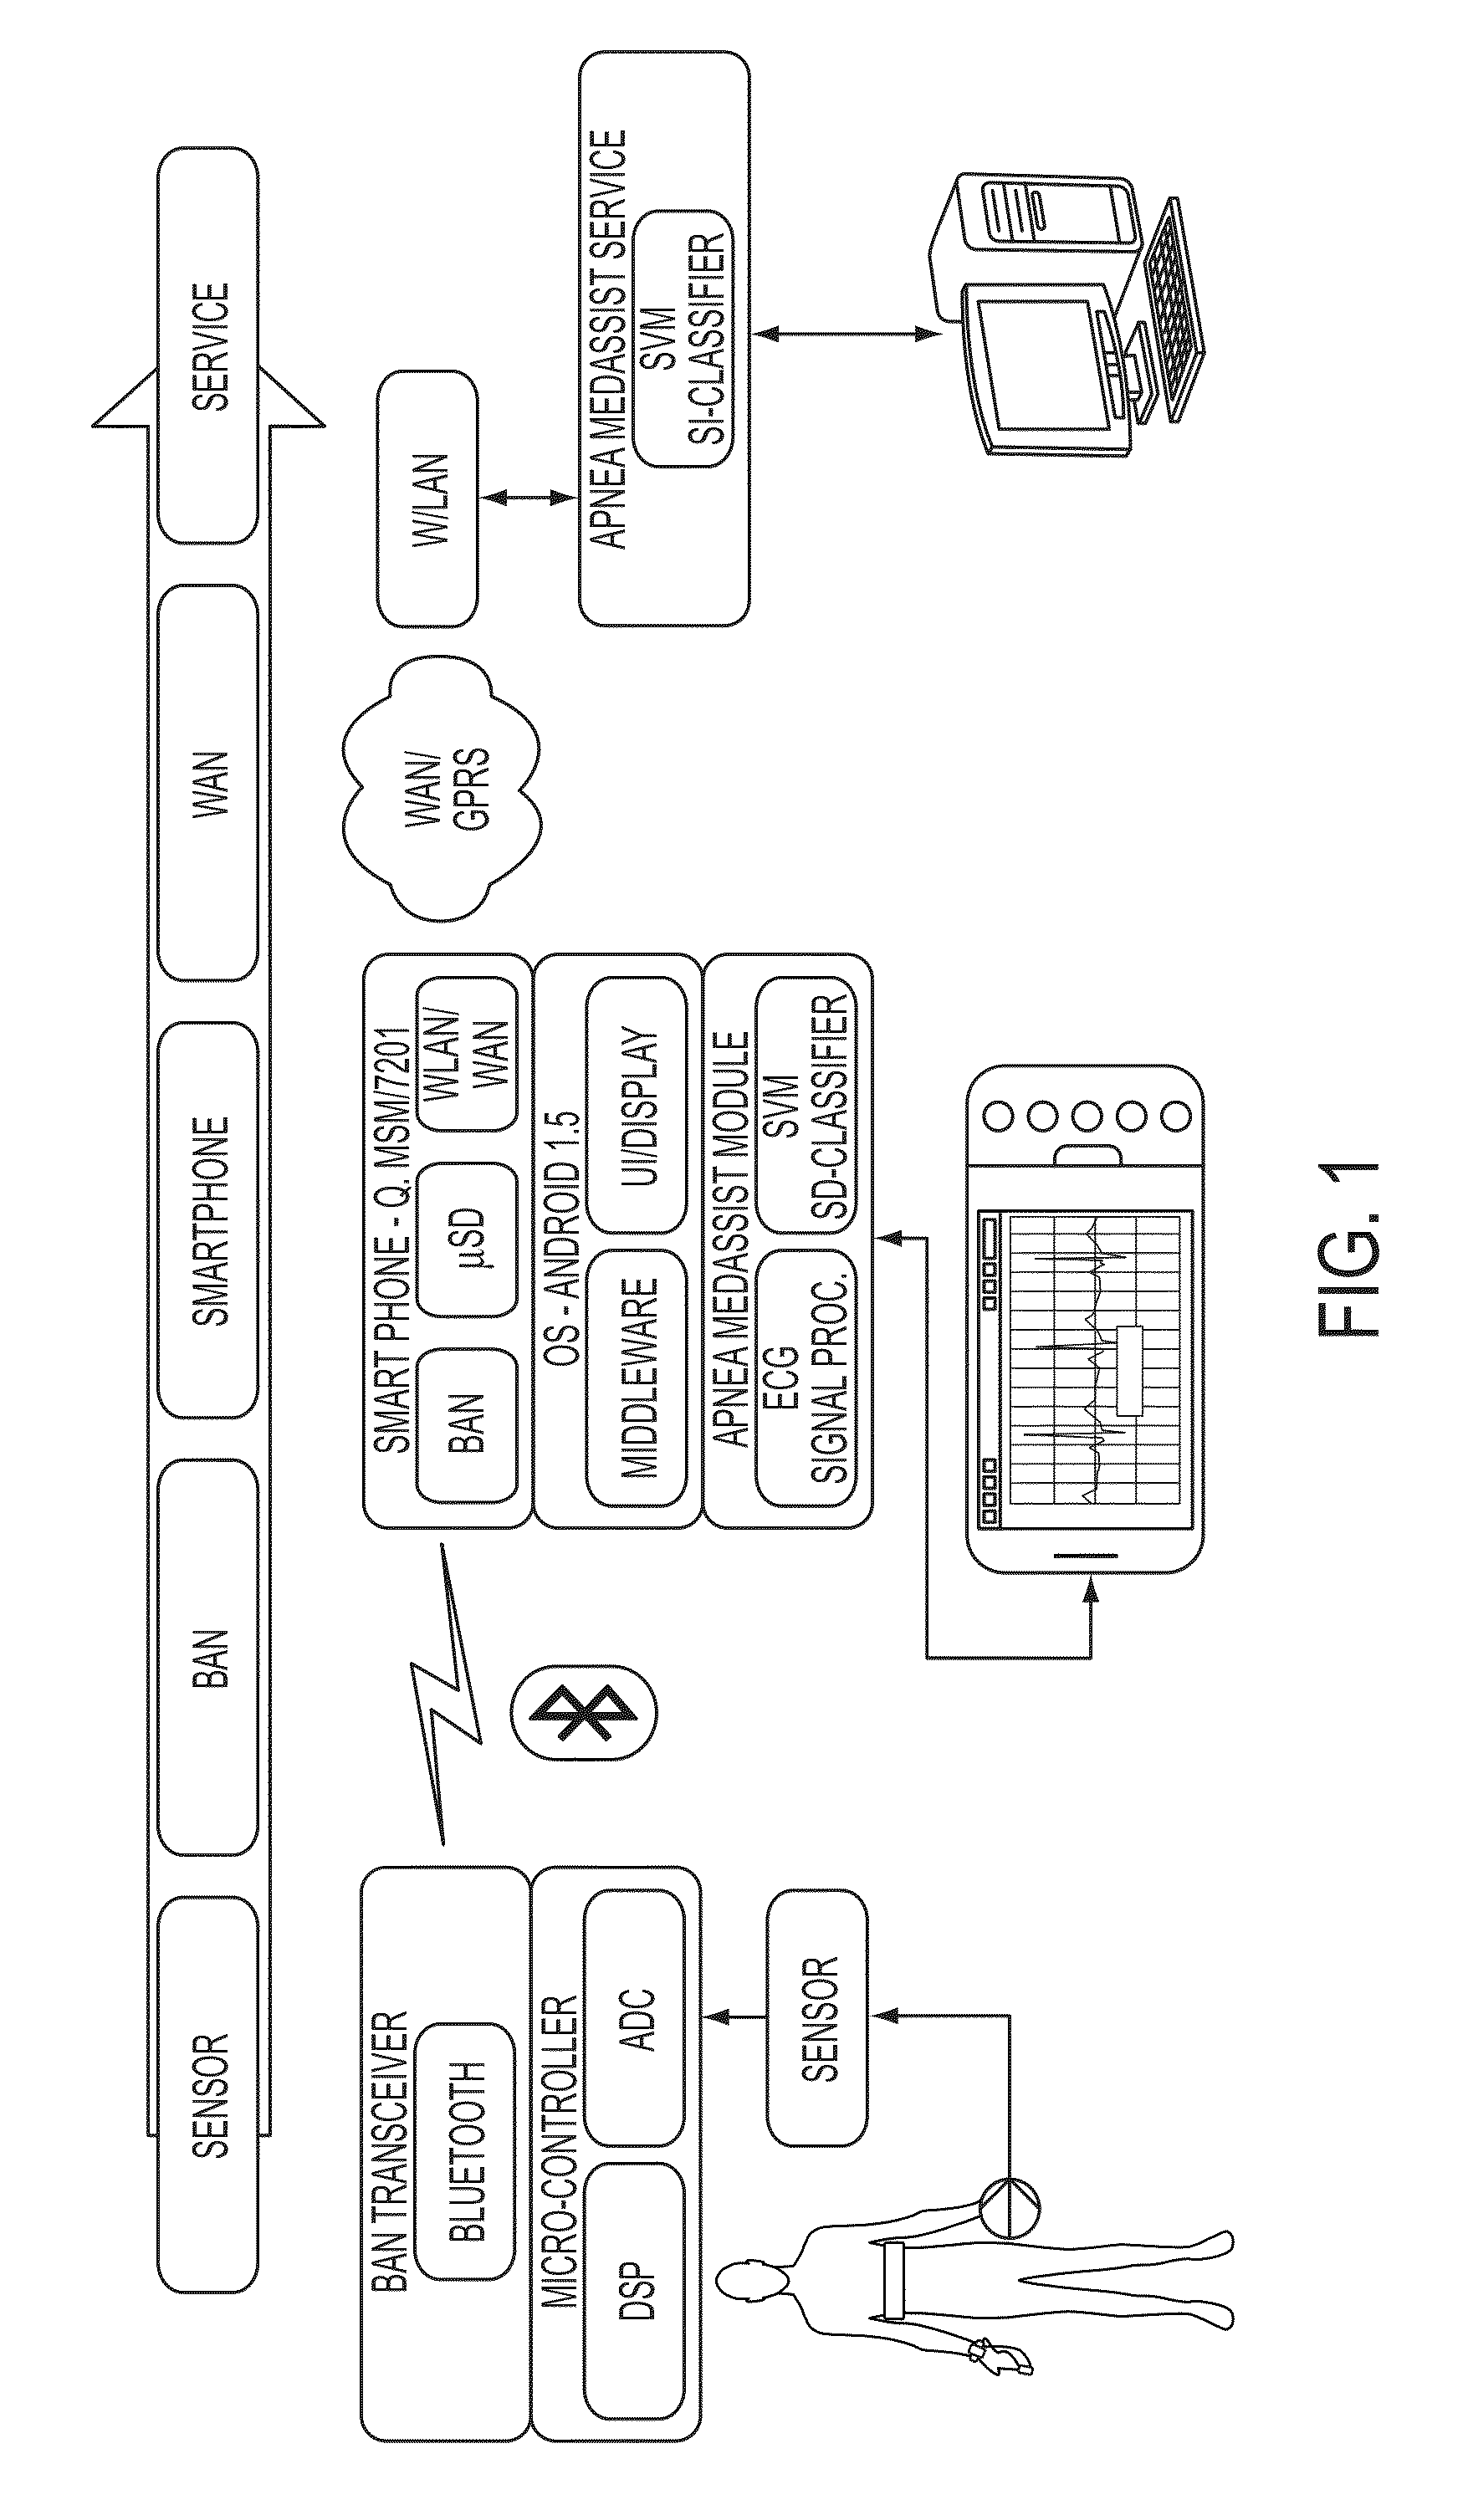 System and method for real-time measurement of sleep quality